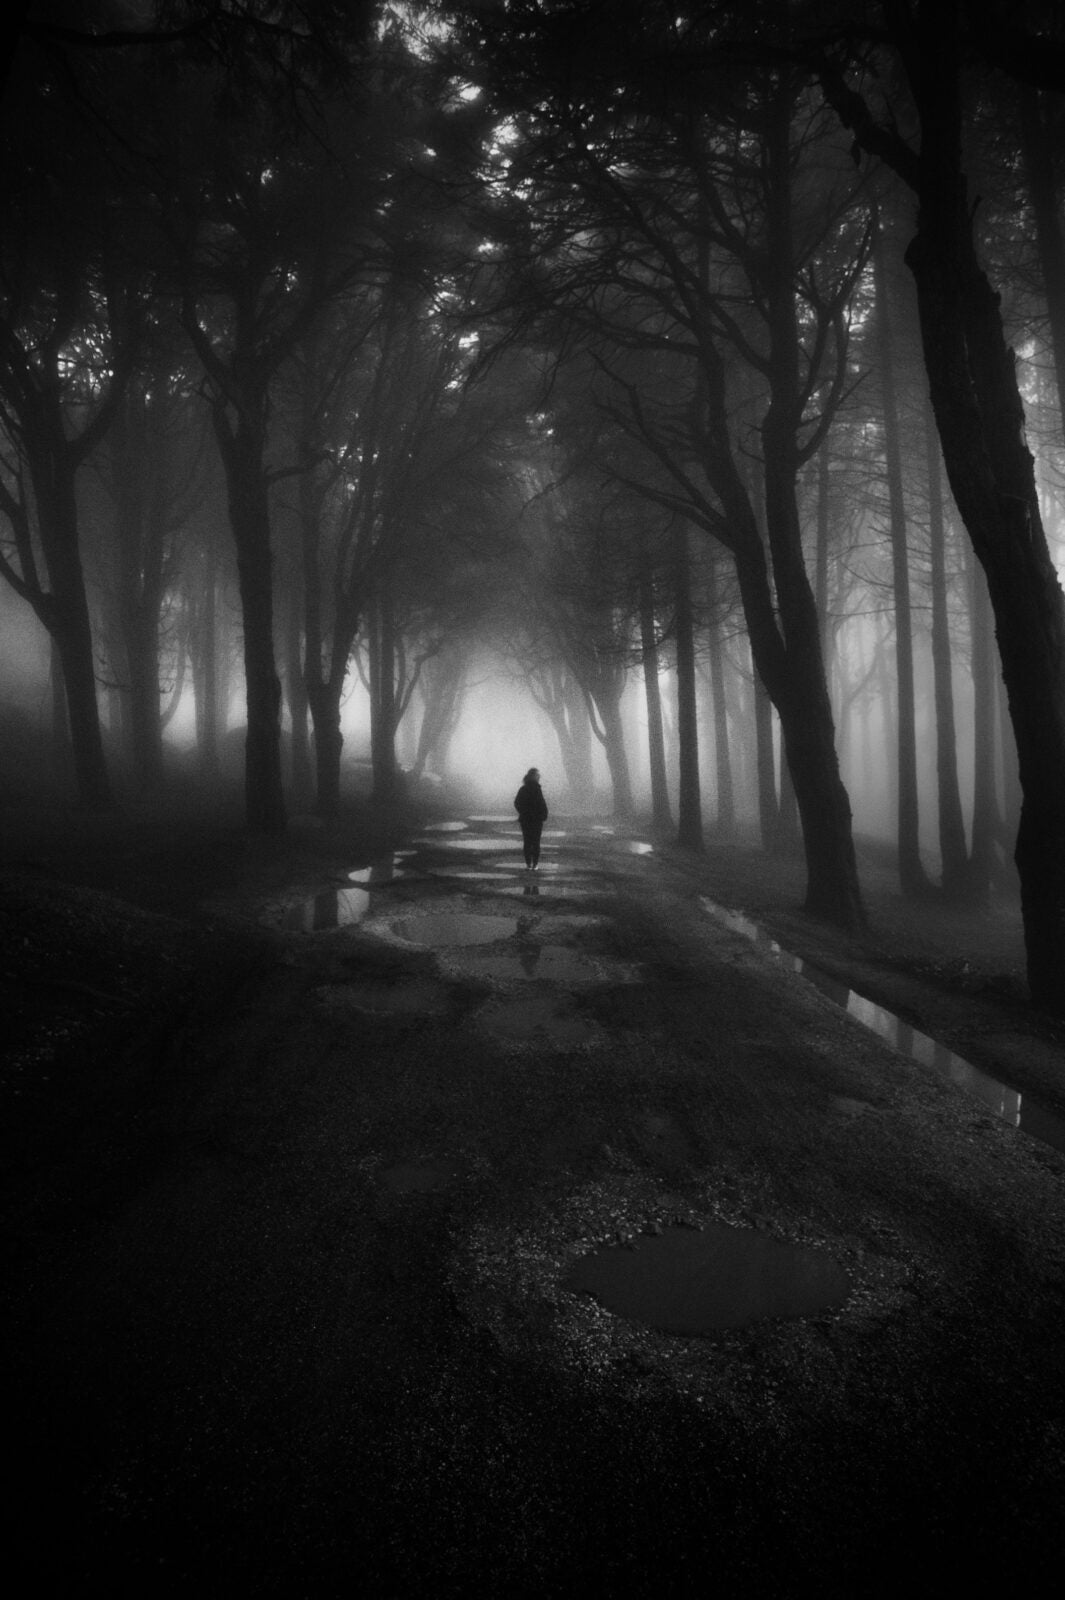 A lone figure walking on a pathway surrounded by tall trees in black and white.